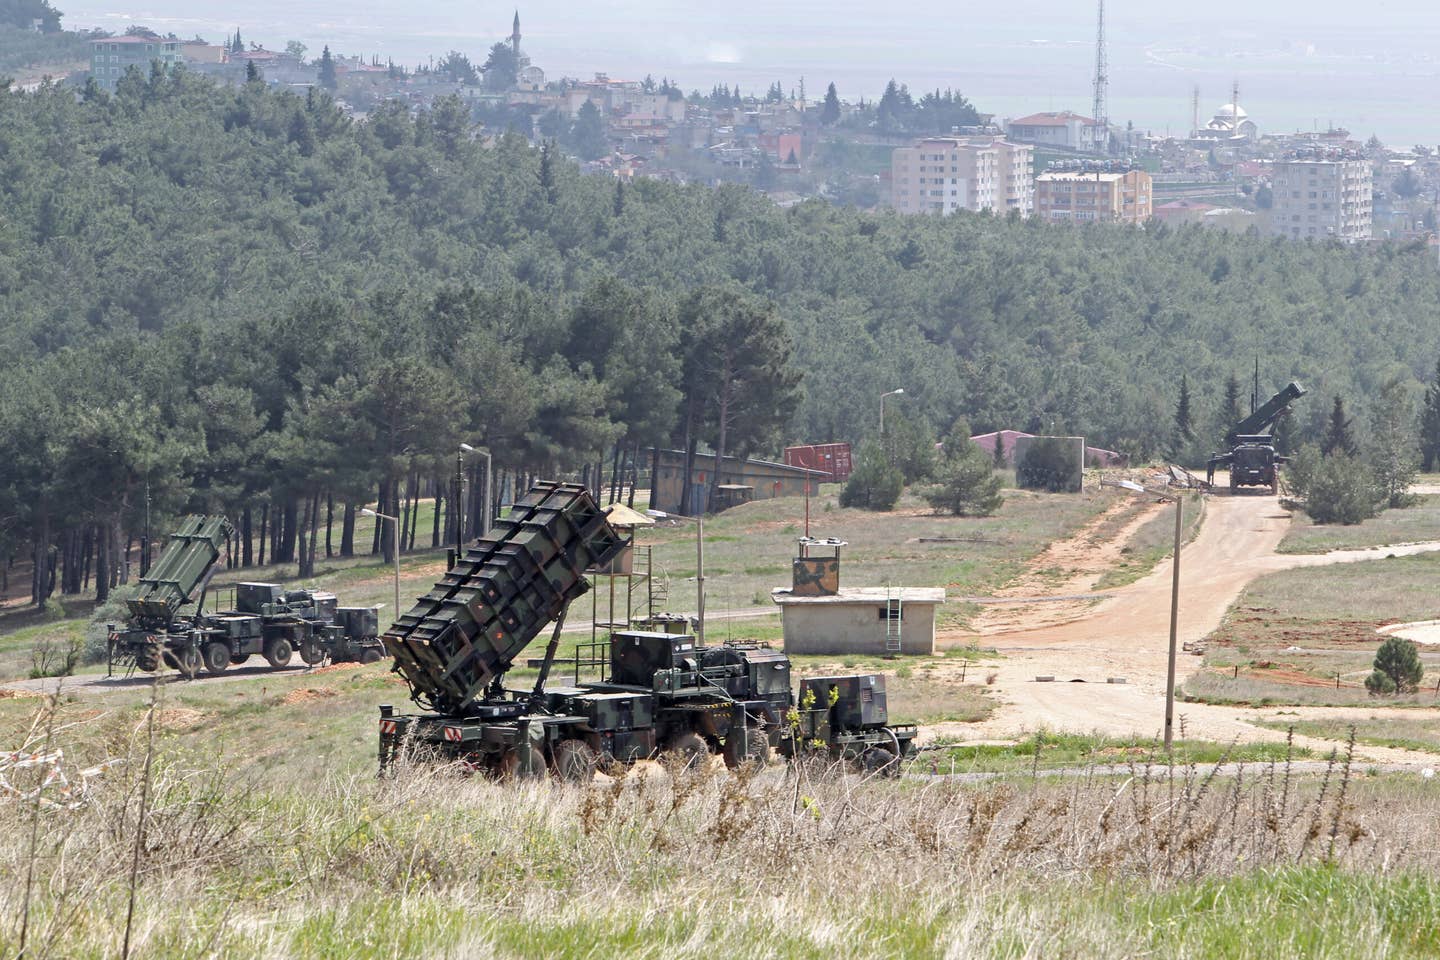 German PAC-3 and PAC-2 air defense systems at Gazi Barracks in Turkey in March 2014, where they were deployed to counter potential missile threats from Syria. <em>Bundeswehr/Carsten Vennemann</em>